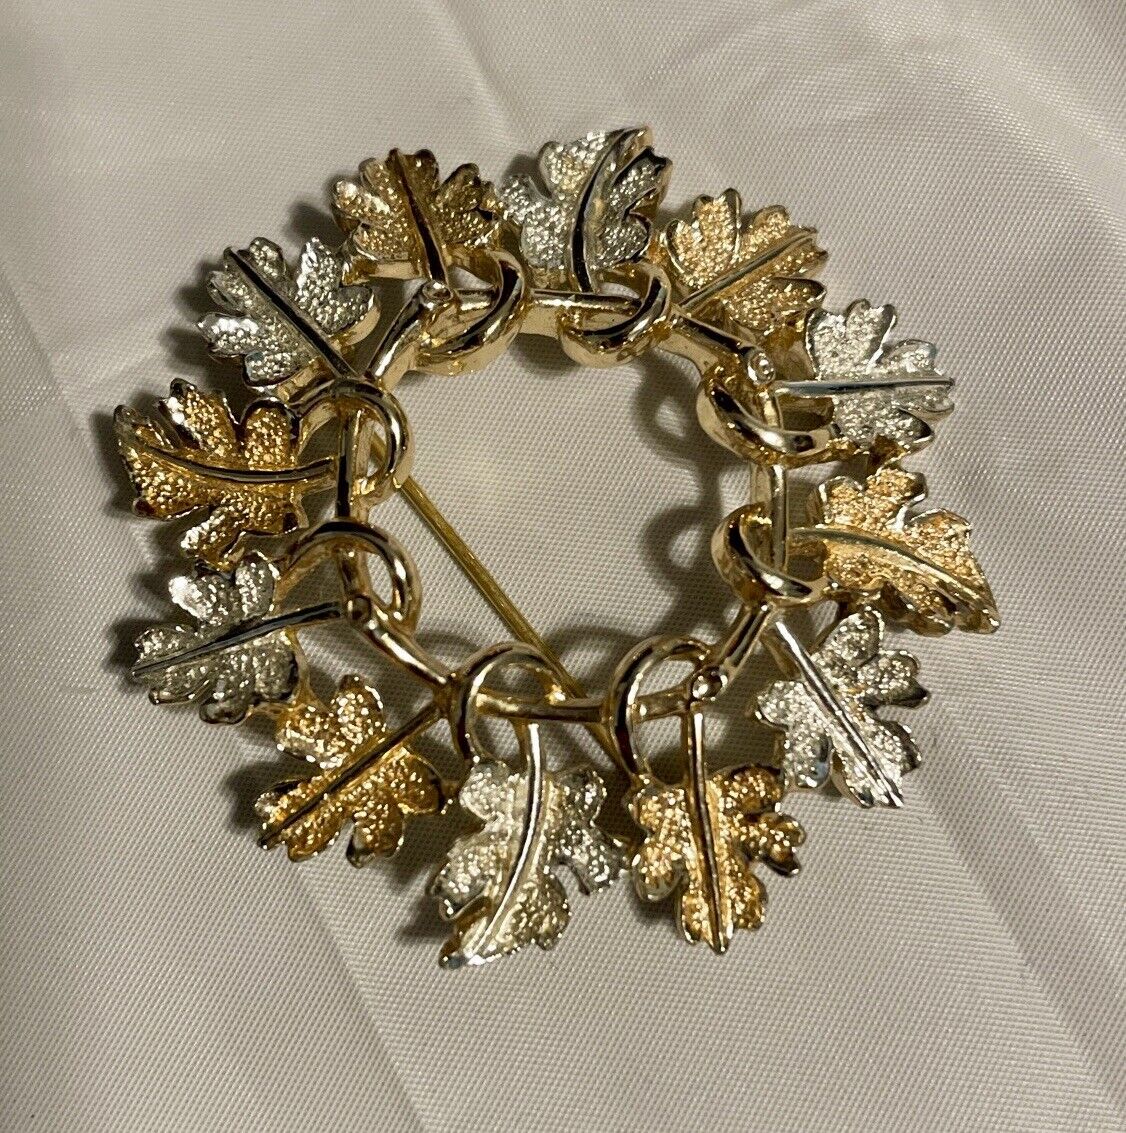 Vintage Sarah Coventry 1960s silver and gold tone leaf wreath  brooch. Mint